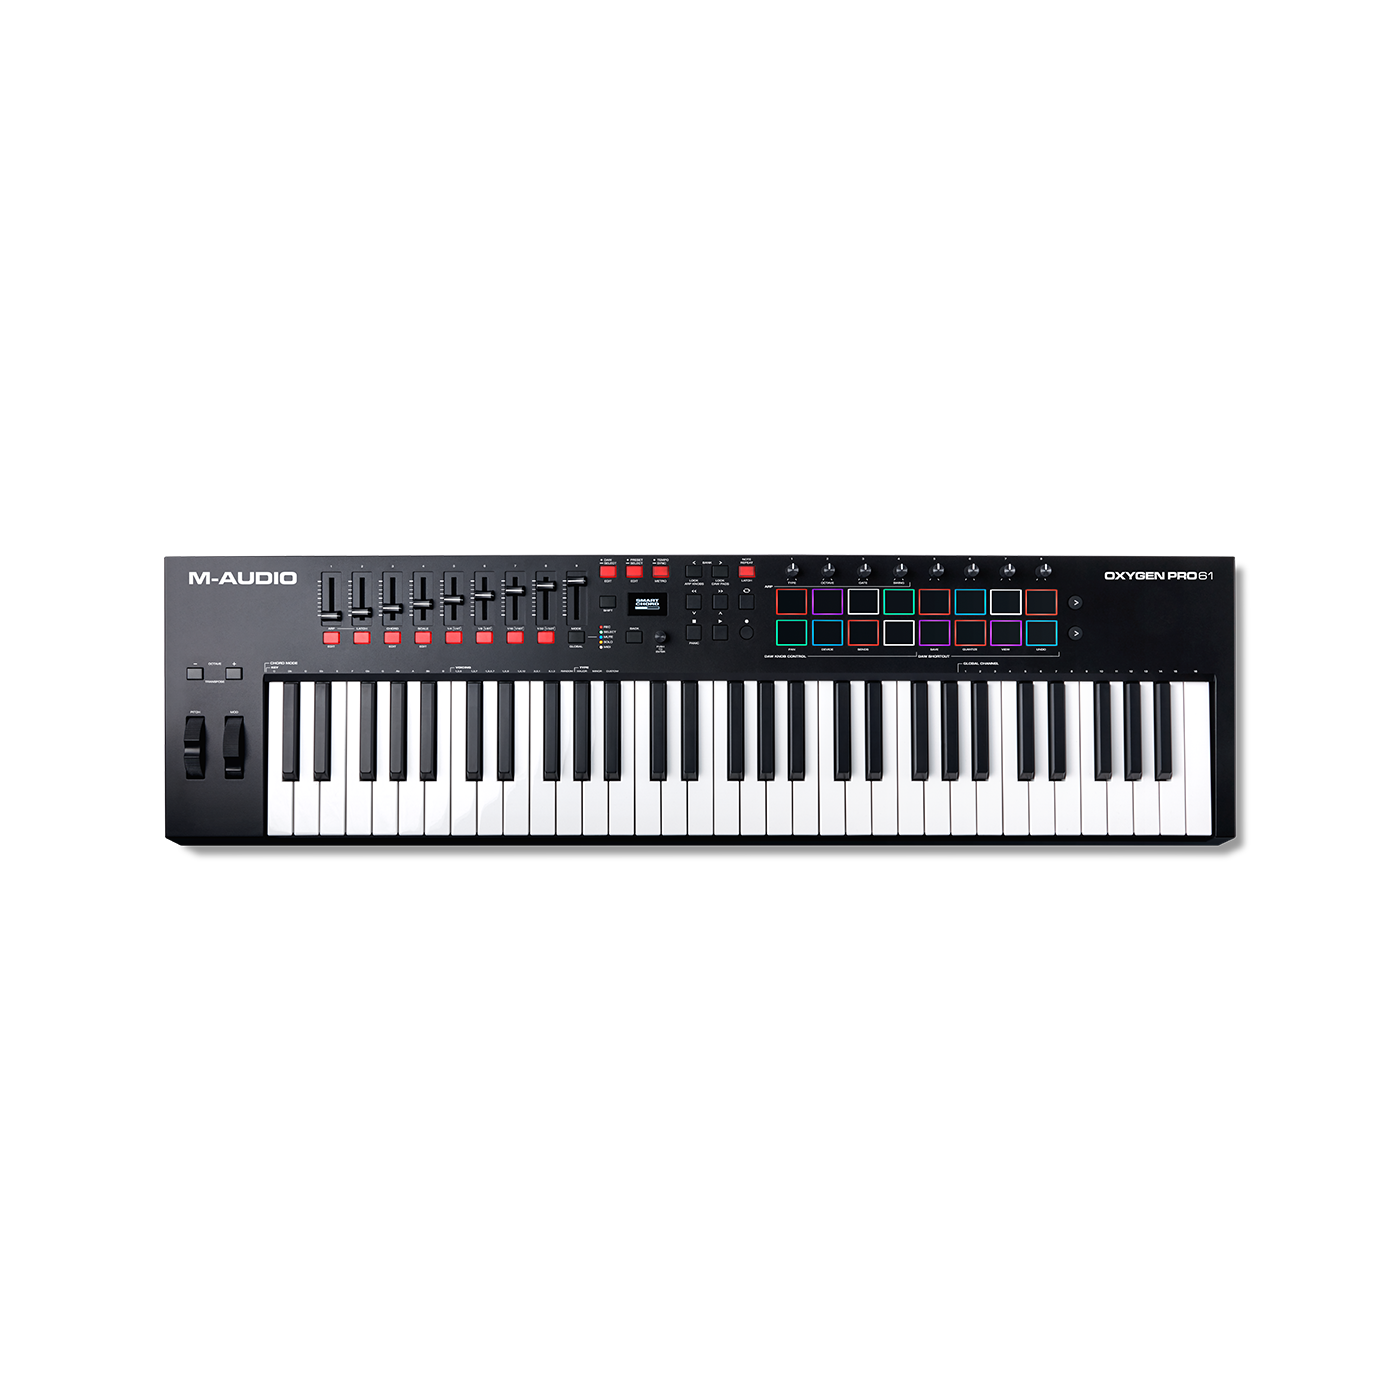 M-Audio Oxygen Pro 61 – 61 Key USB MIDI Keyboard Controller With Beat Pads, MIDI assignable Knobs, Buttons & Faders and Software Suite Included